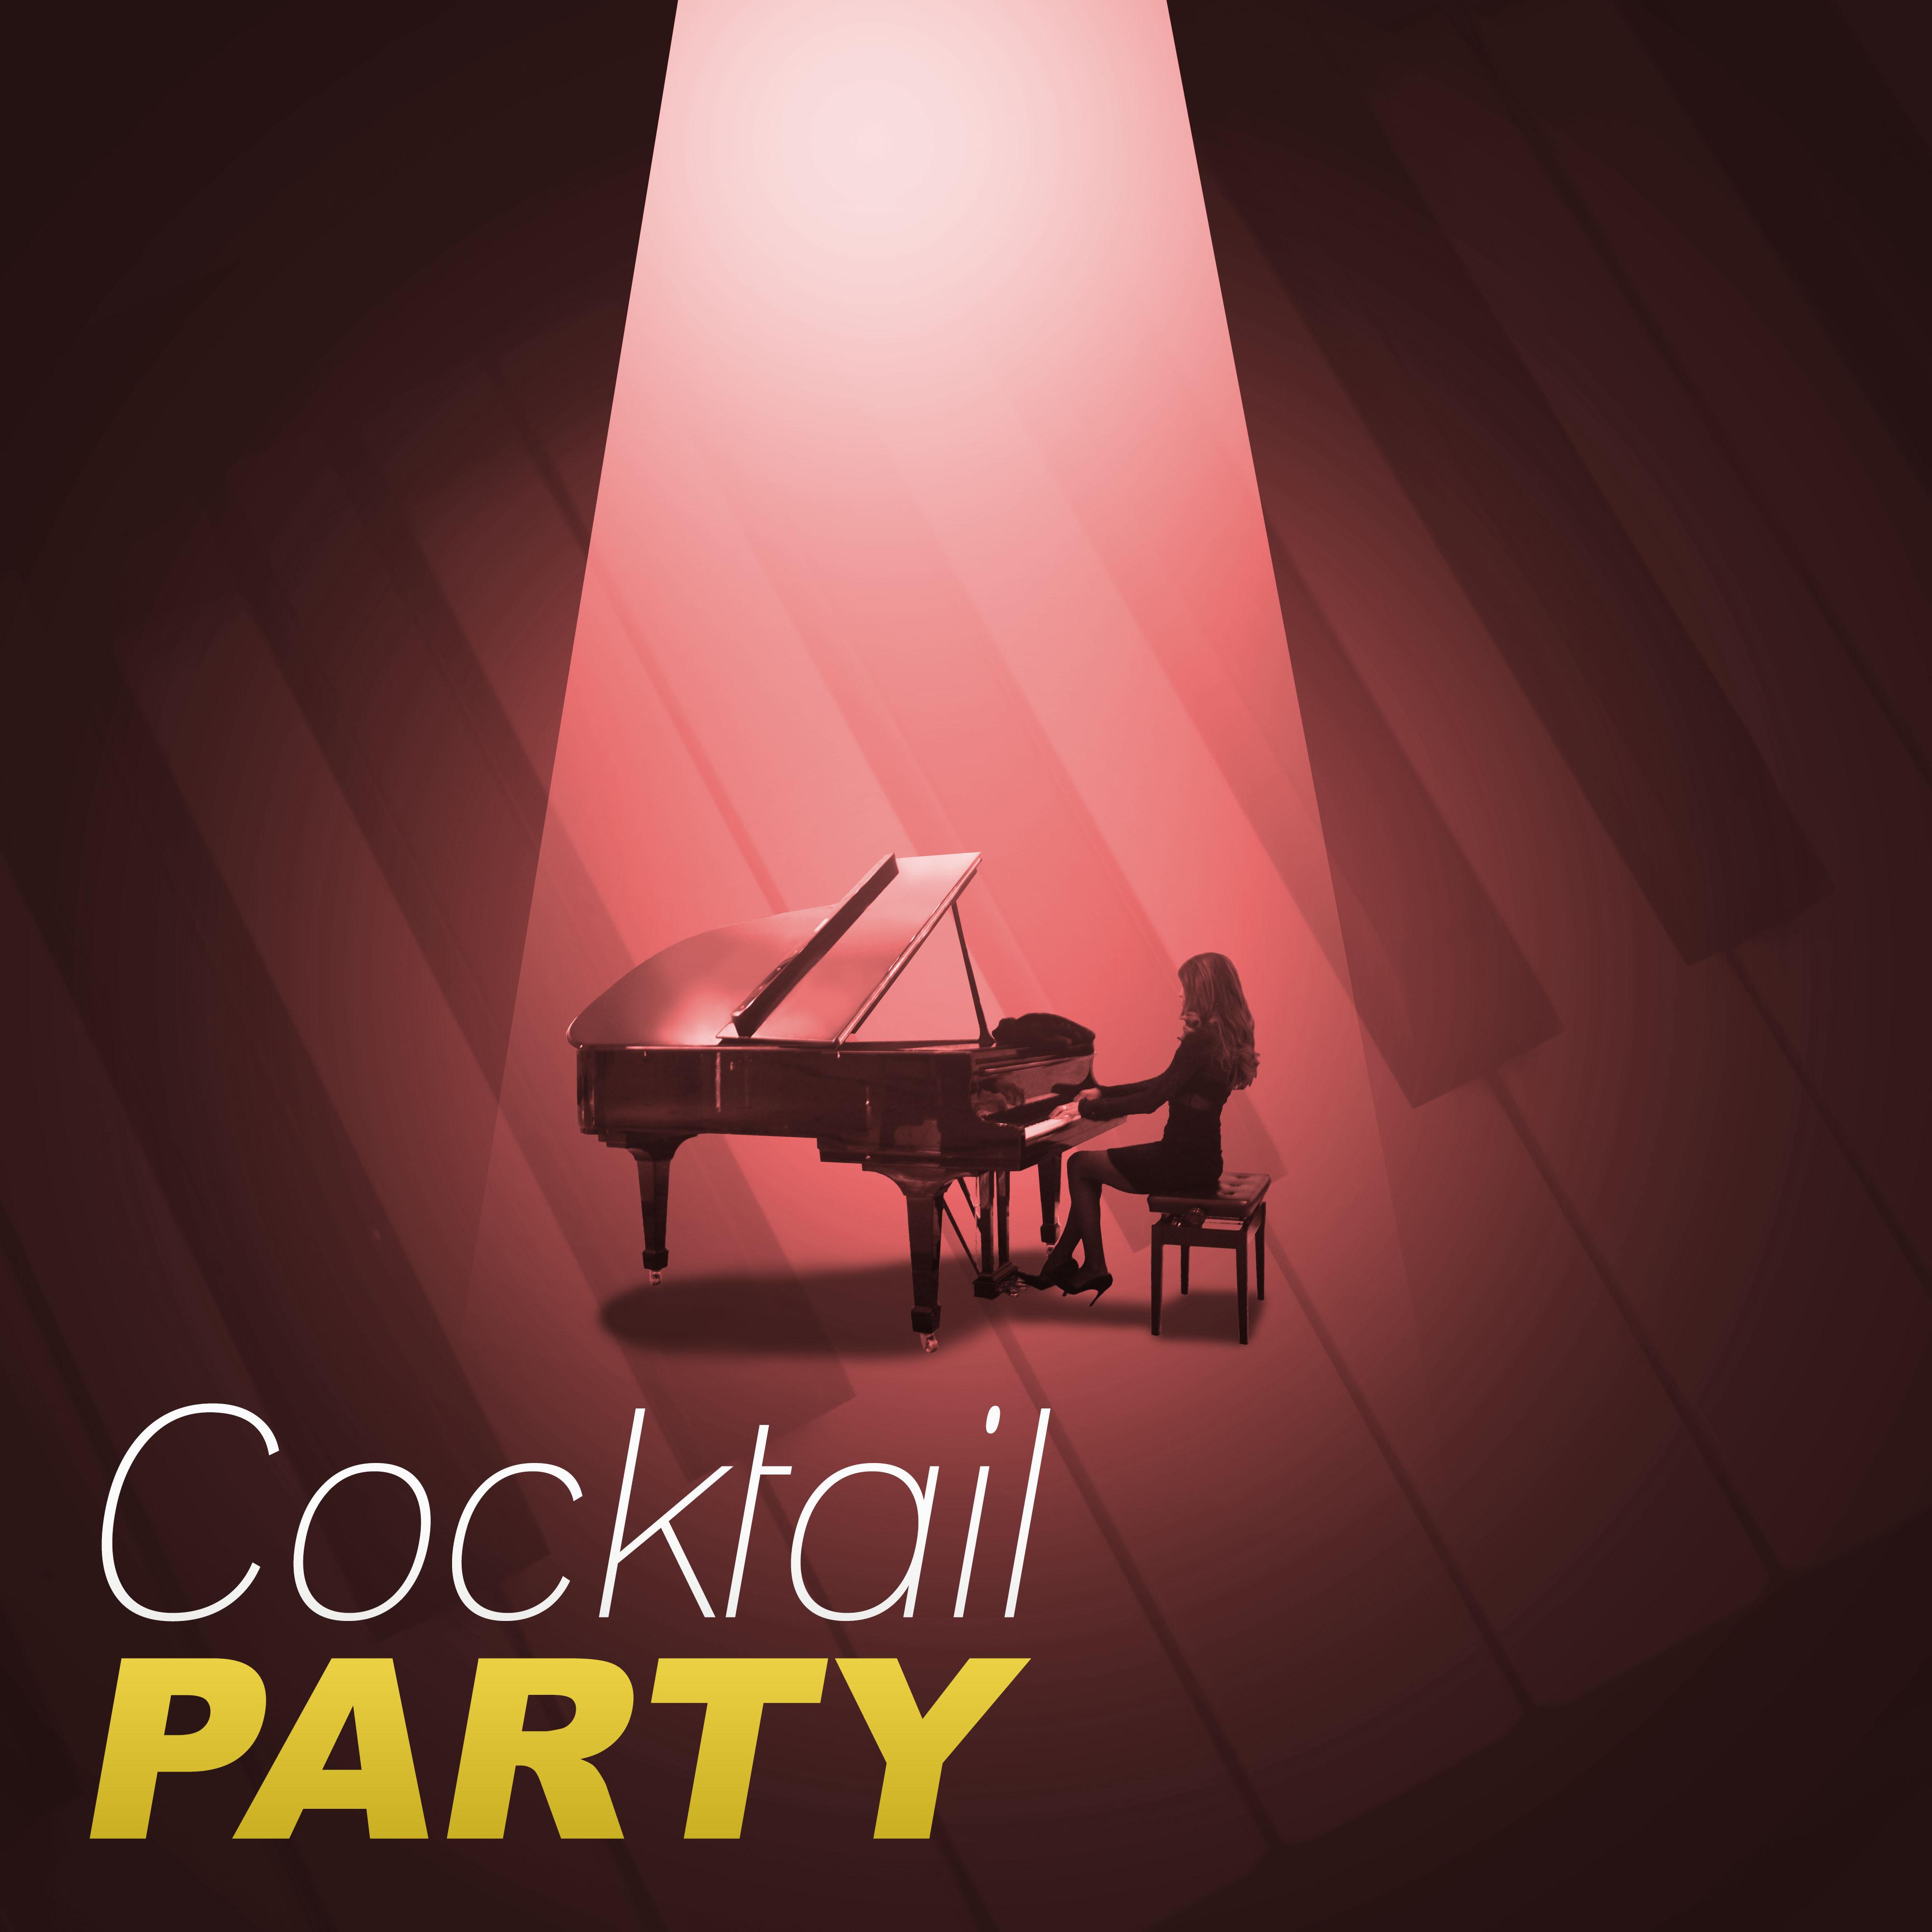 Cocktail Party – Relaxing Piano Bar, Soft Jazz Music, Calm Jazz, Restaurant Chill, Cafe Lounge